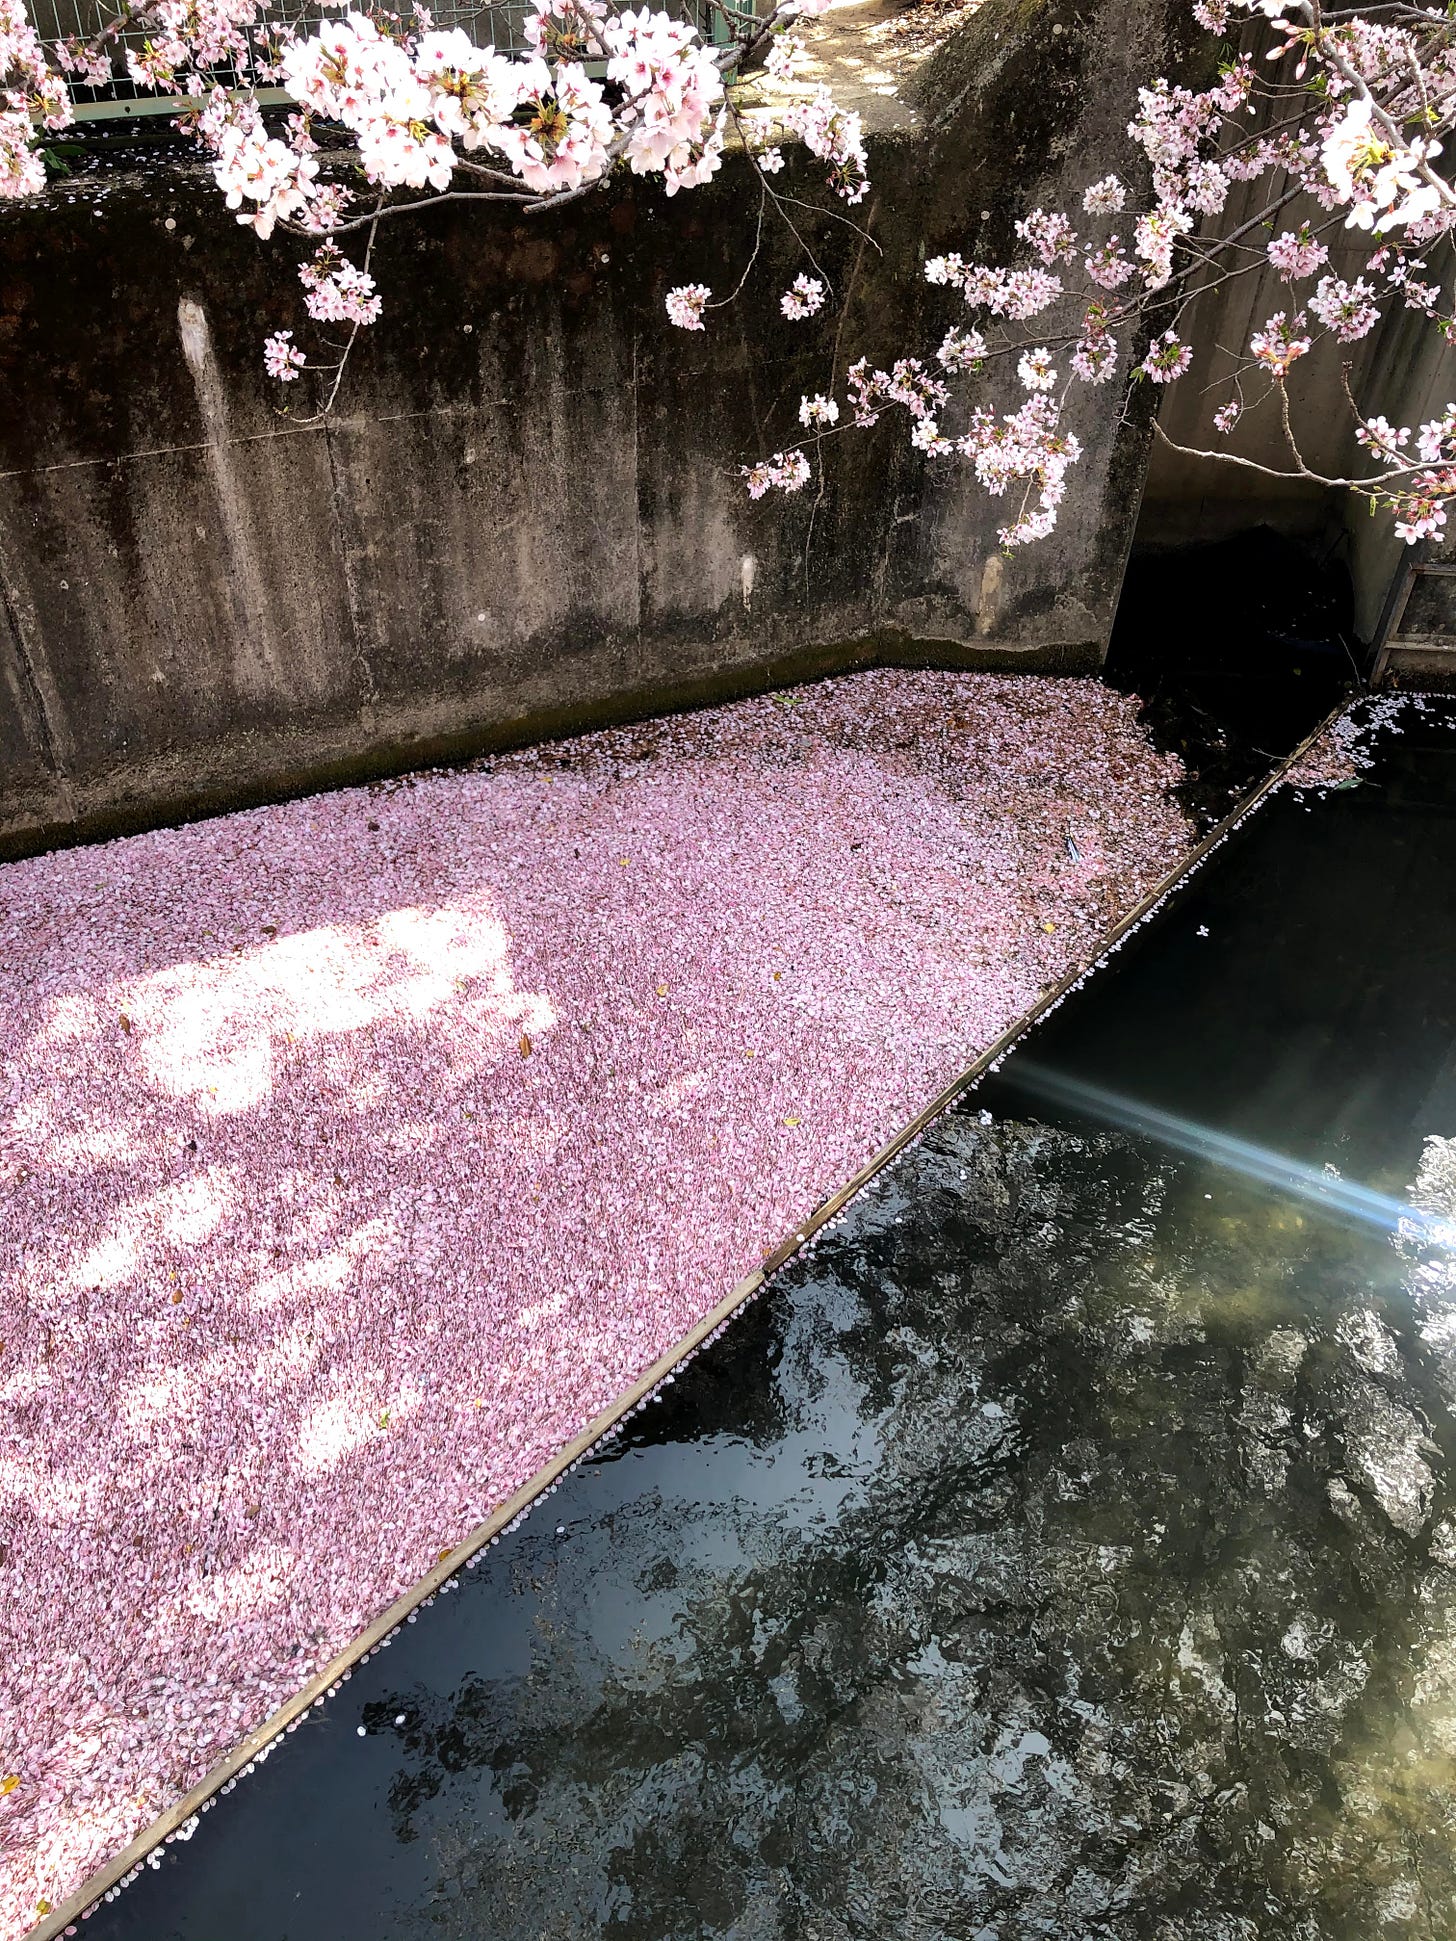 Cherry blossom petals collect on the surface of the water of a canal